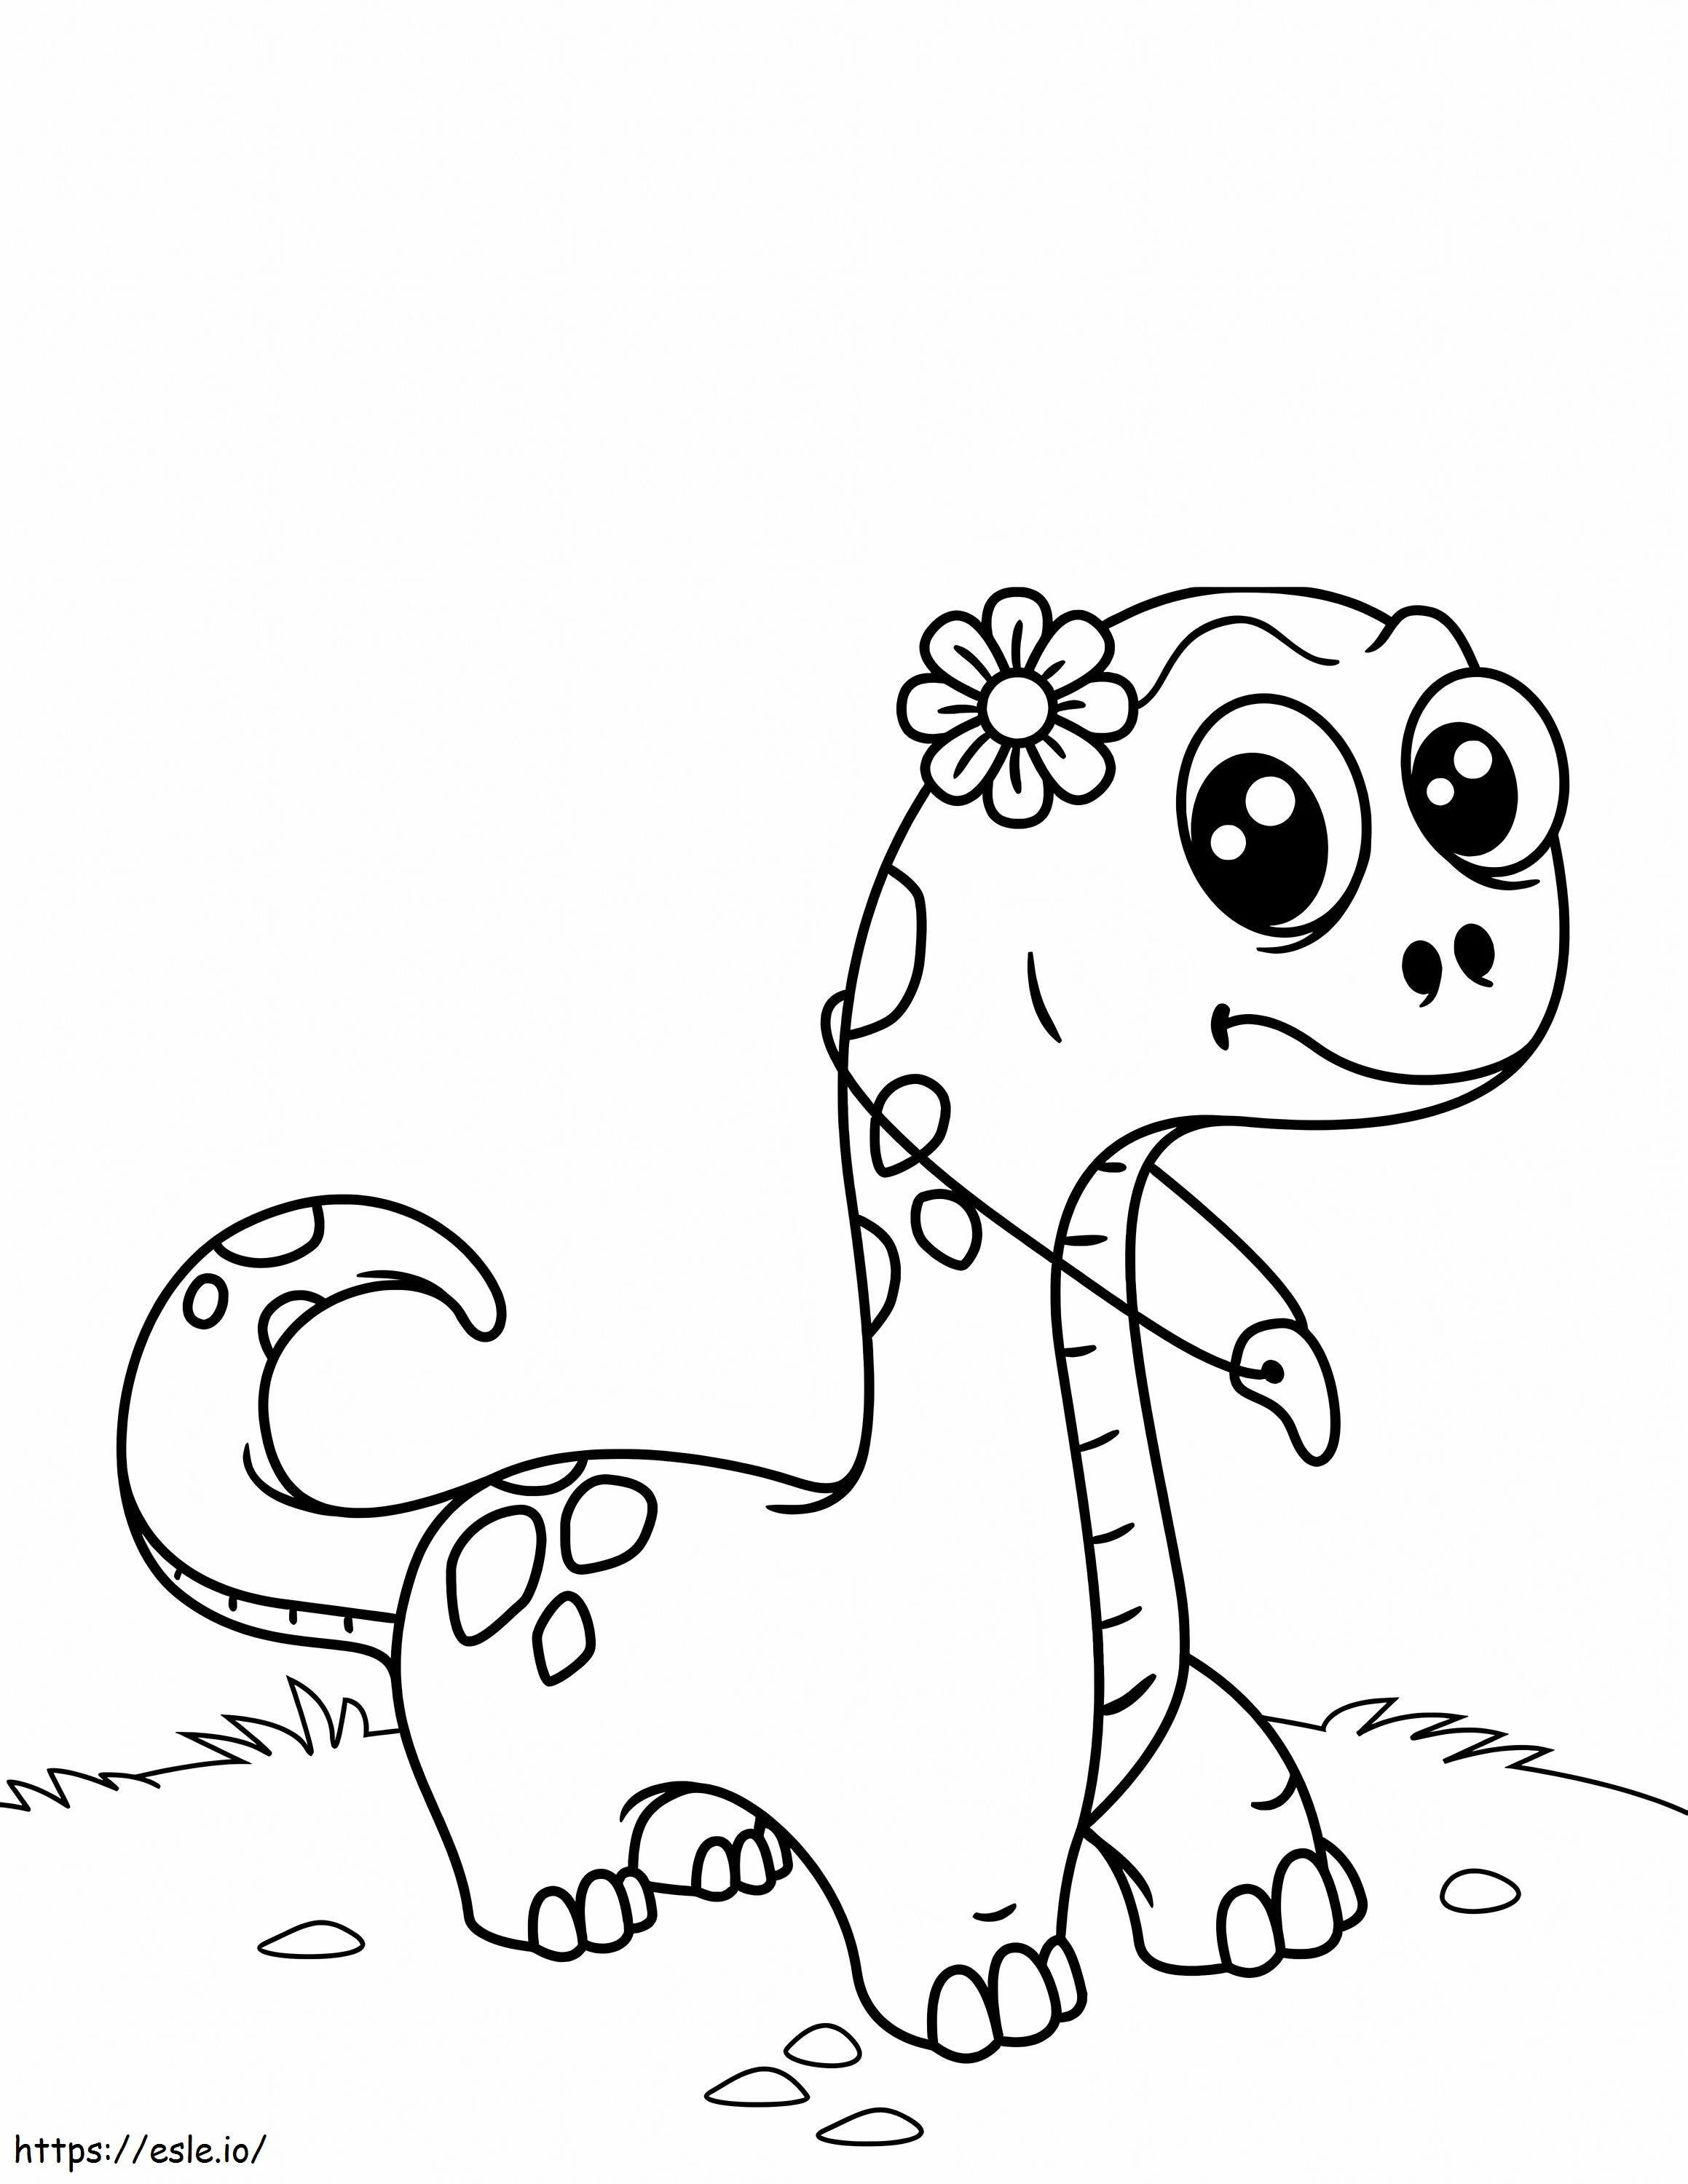 Cute Dinosaur With Tooth Necklace coloring page